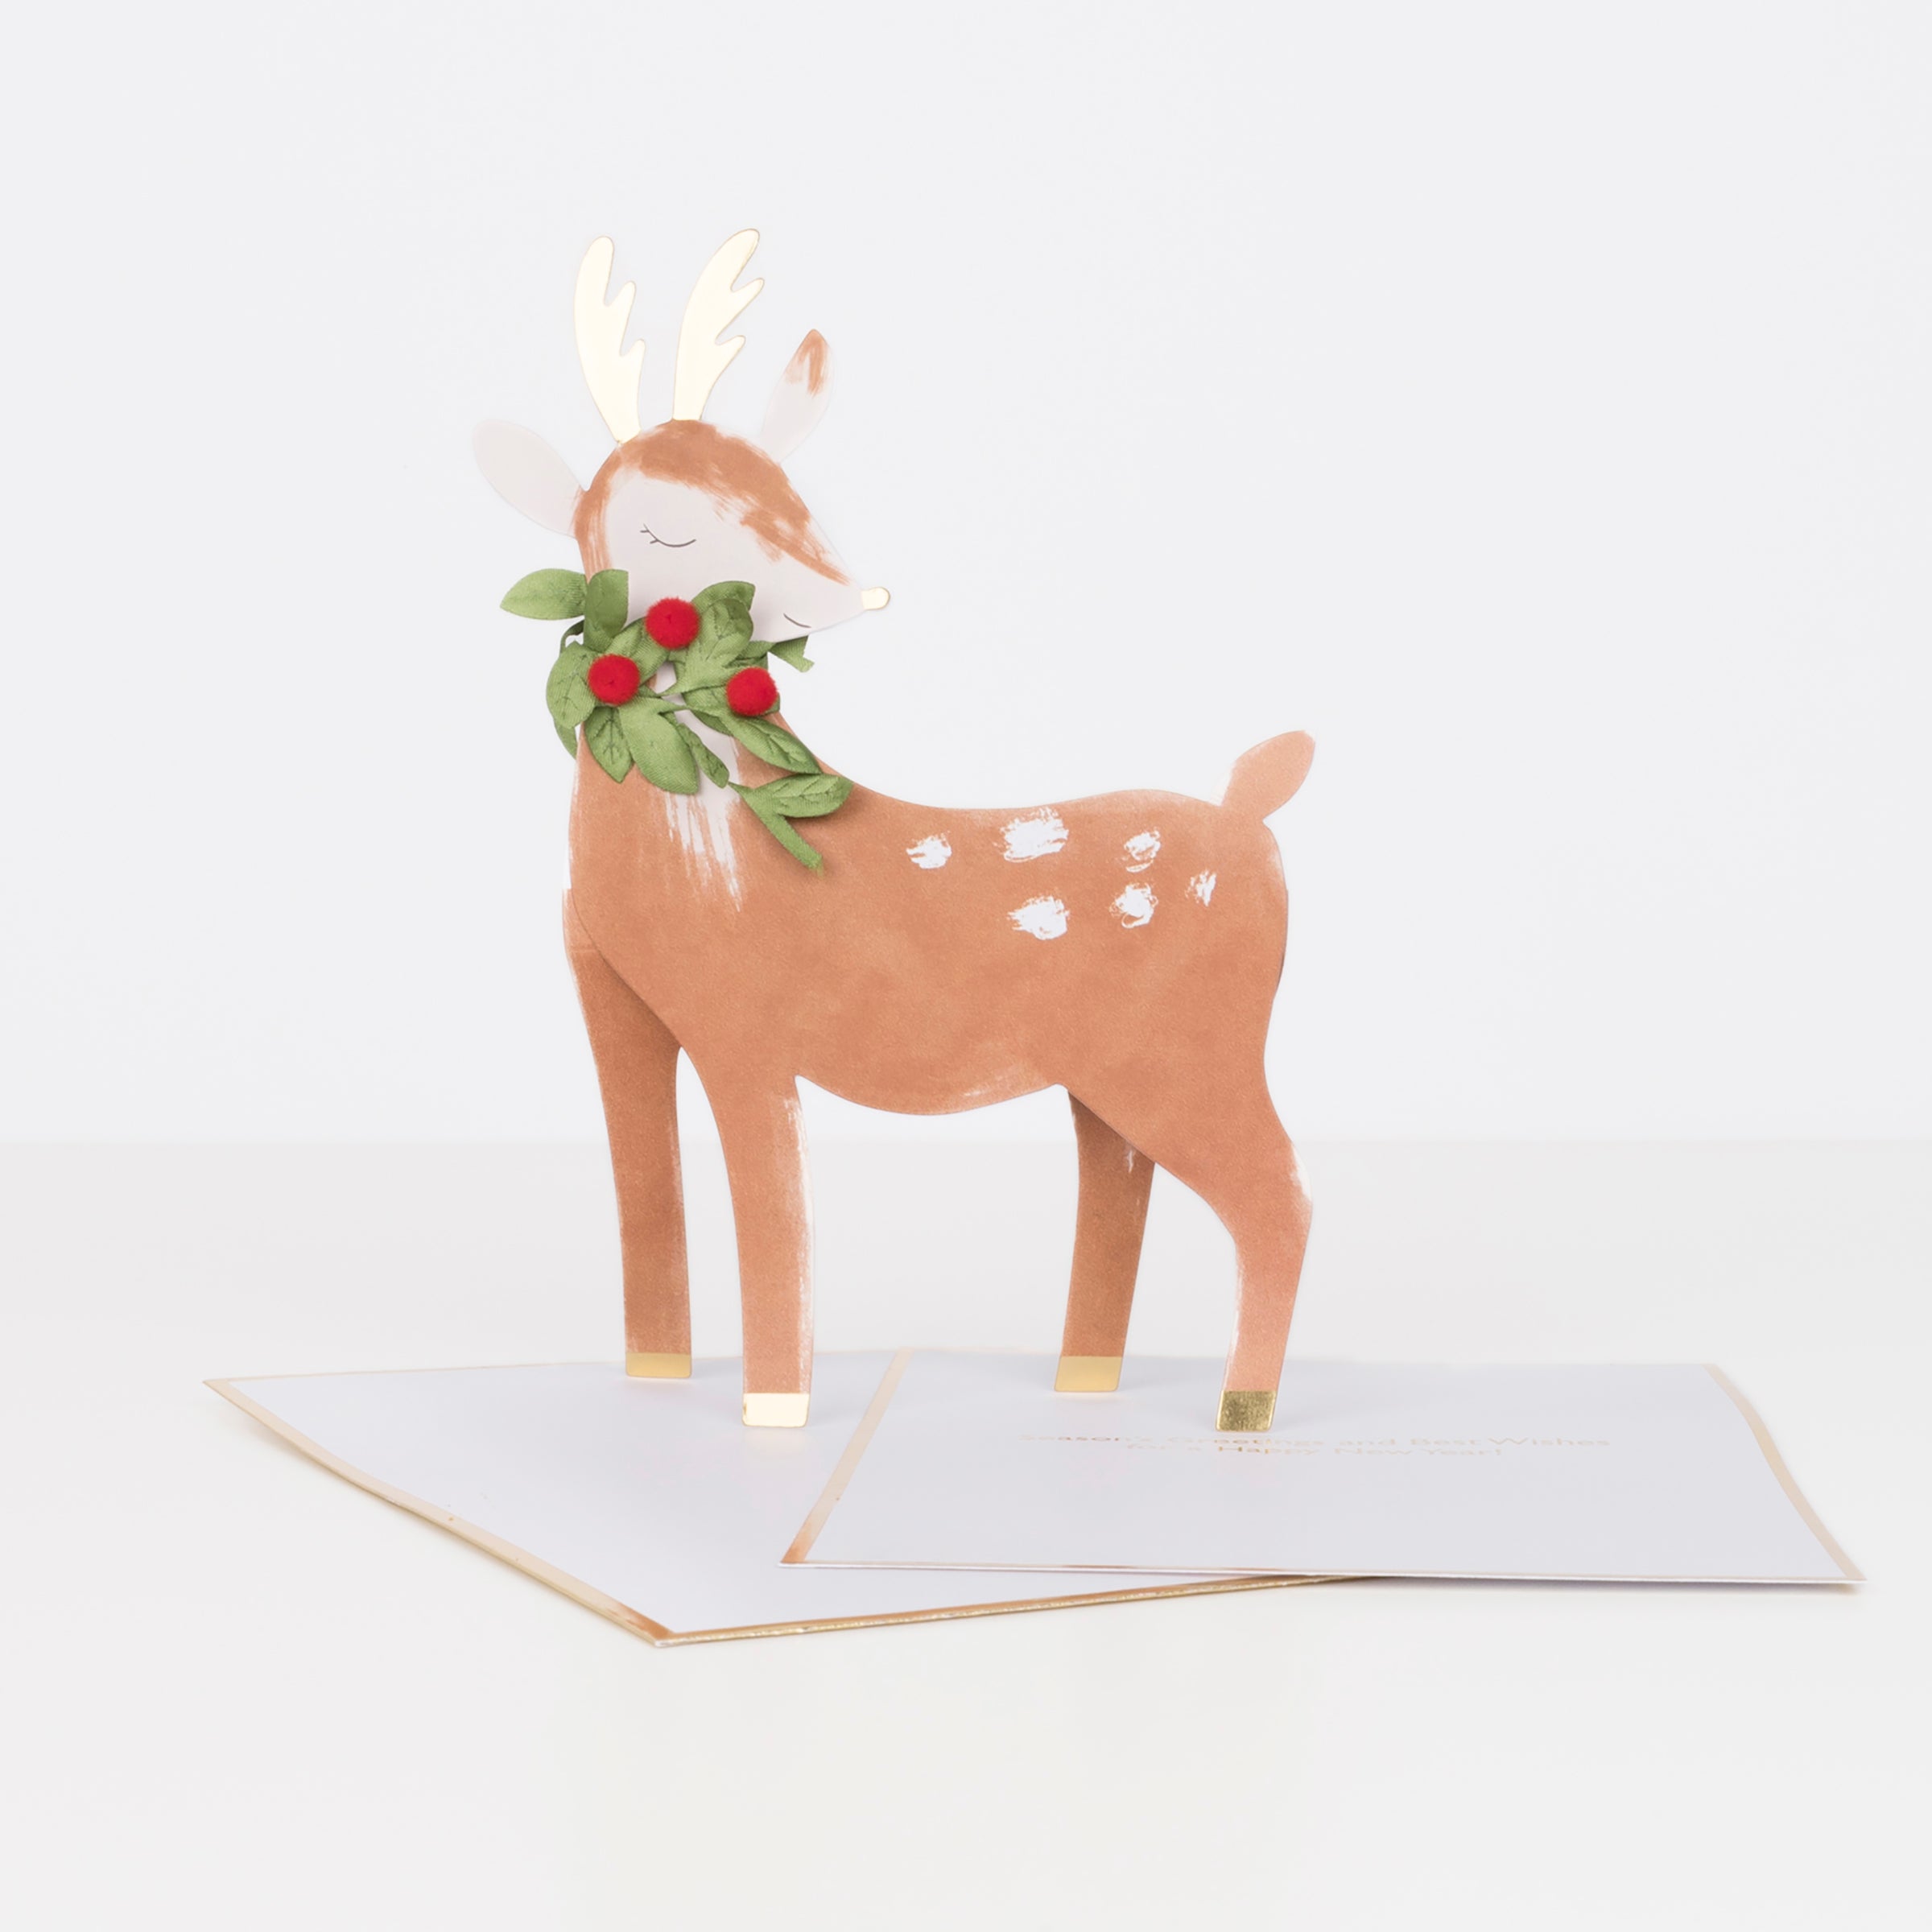 This gorgeous 3D Christmas card features a reindeer with gold foil, ribbon and pompom details.